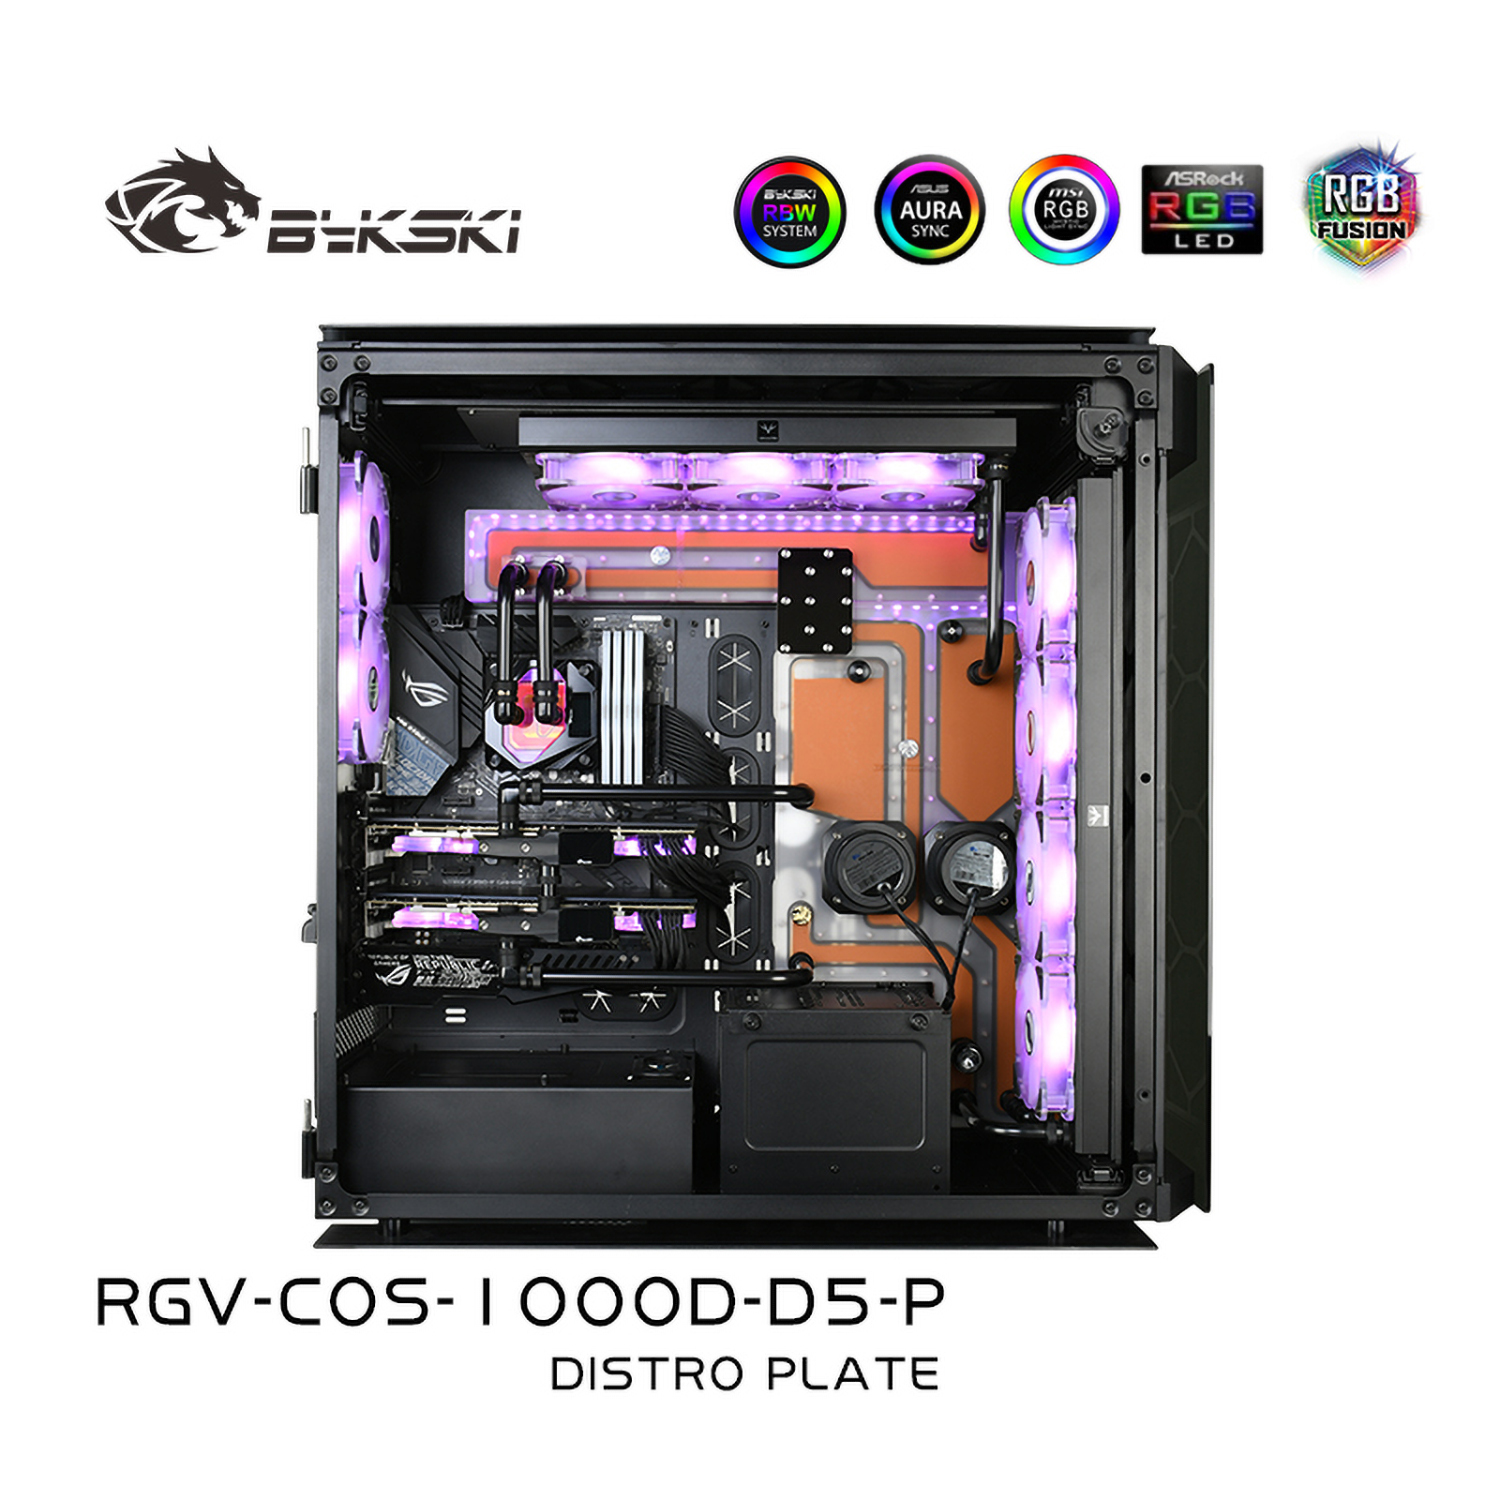 Bykski Distro Plate Kit For Corsair 1000D Case, 5V A-RGB Complete Loop For Single GPU Building, Water Board, RGV-COS-1000D-D5-P at formulamod sale